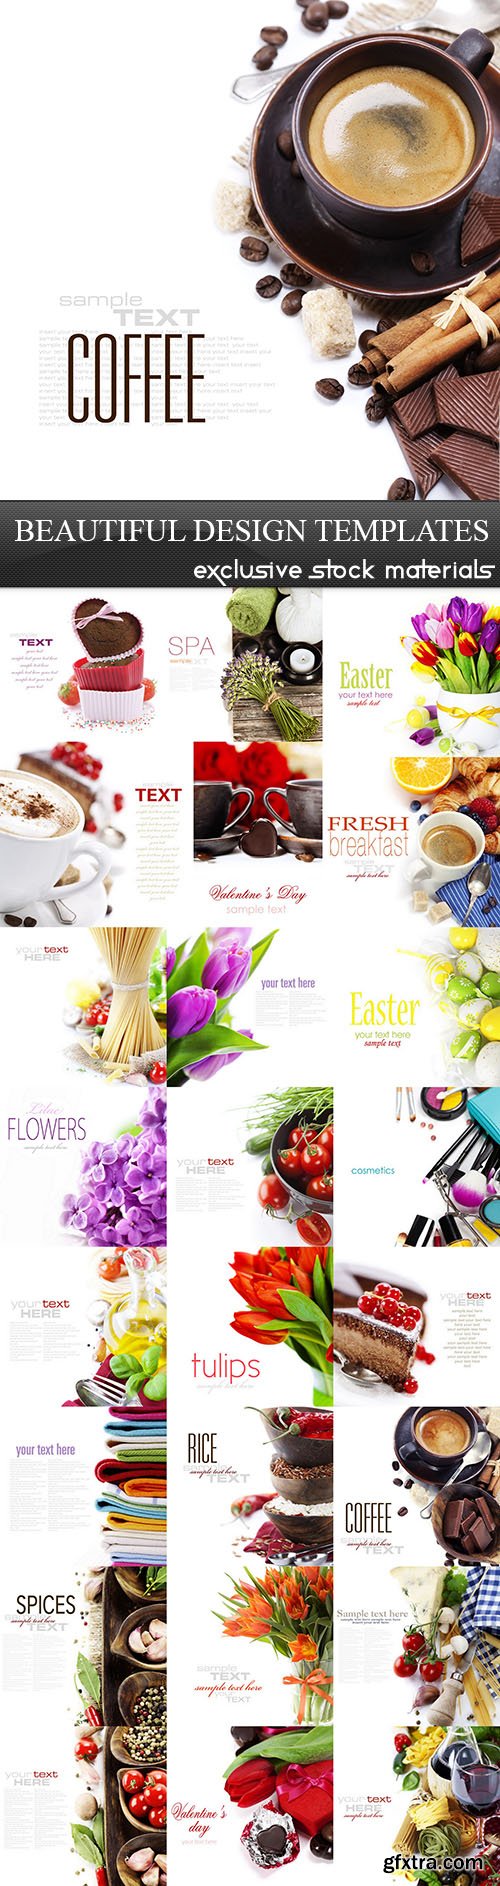 Beautiful Food & Drink Design Templates with White Background 25xJPG